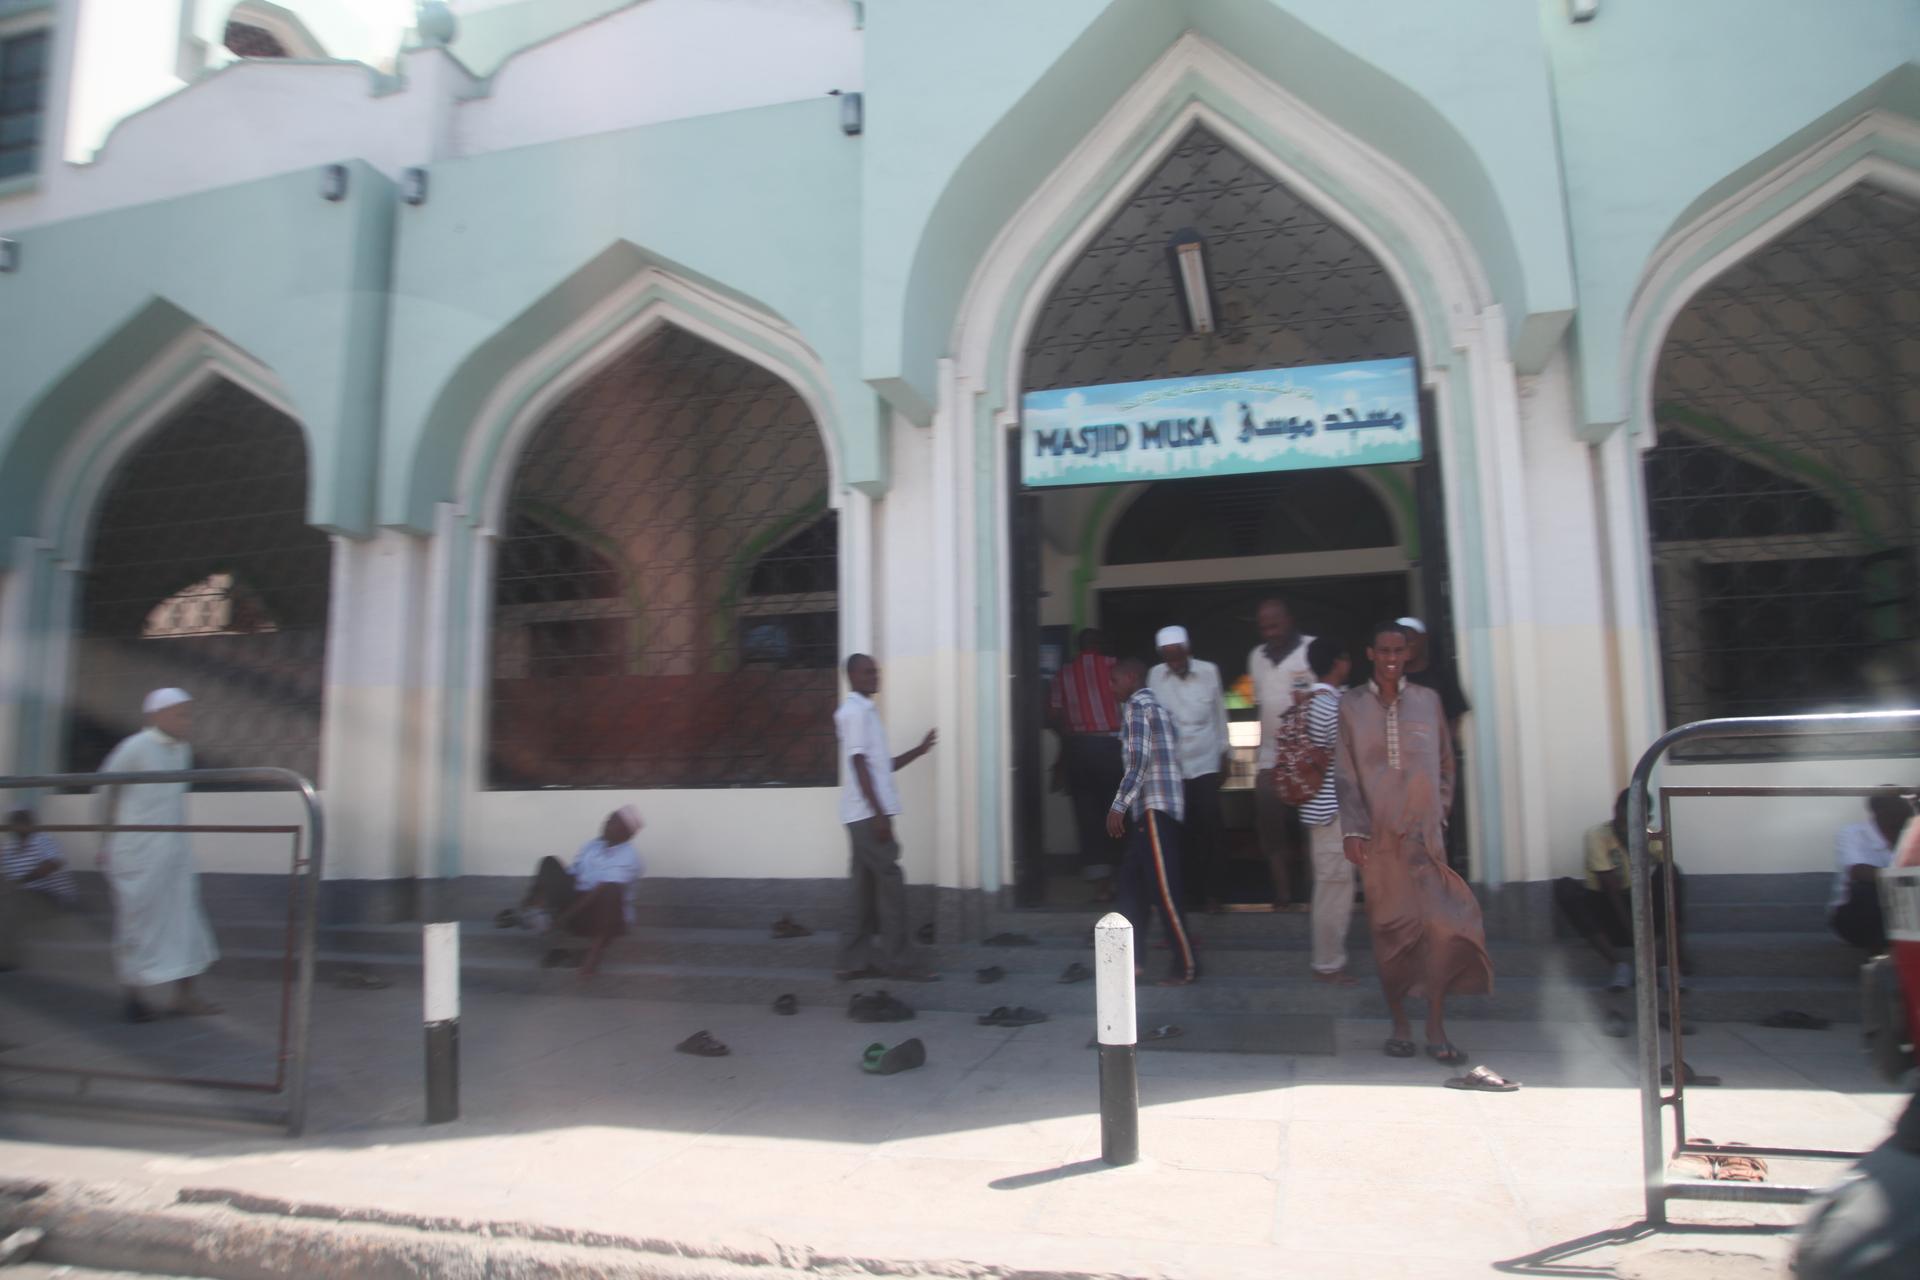 Mosque Musa in Mombasa